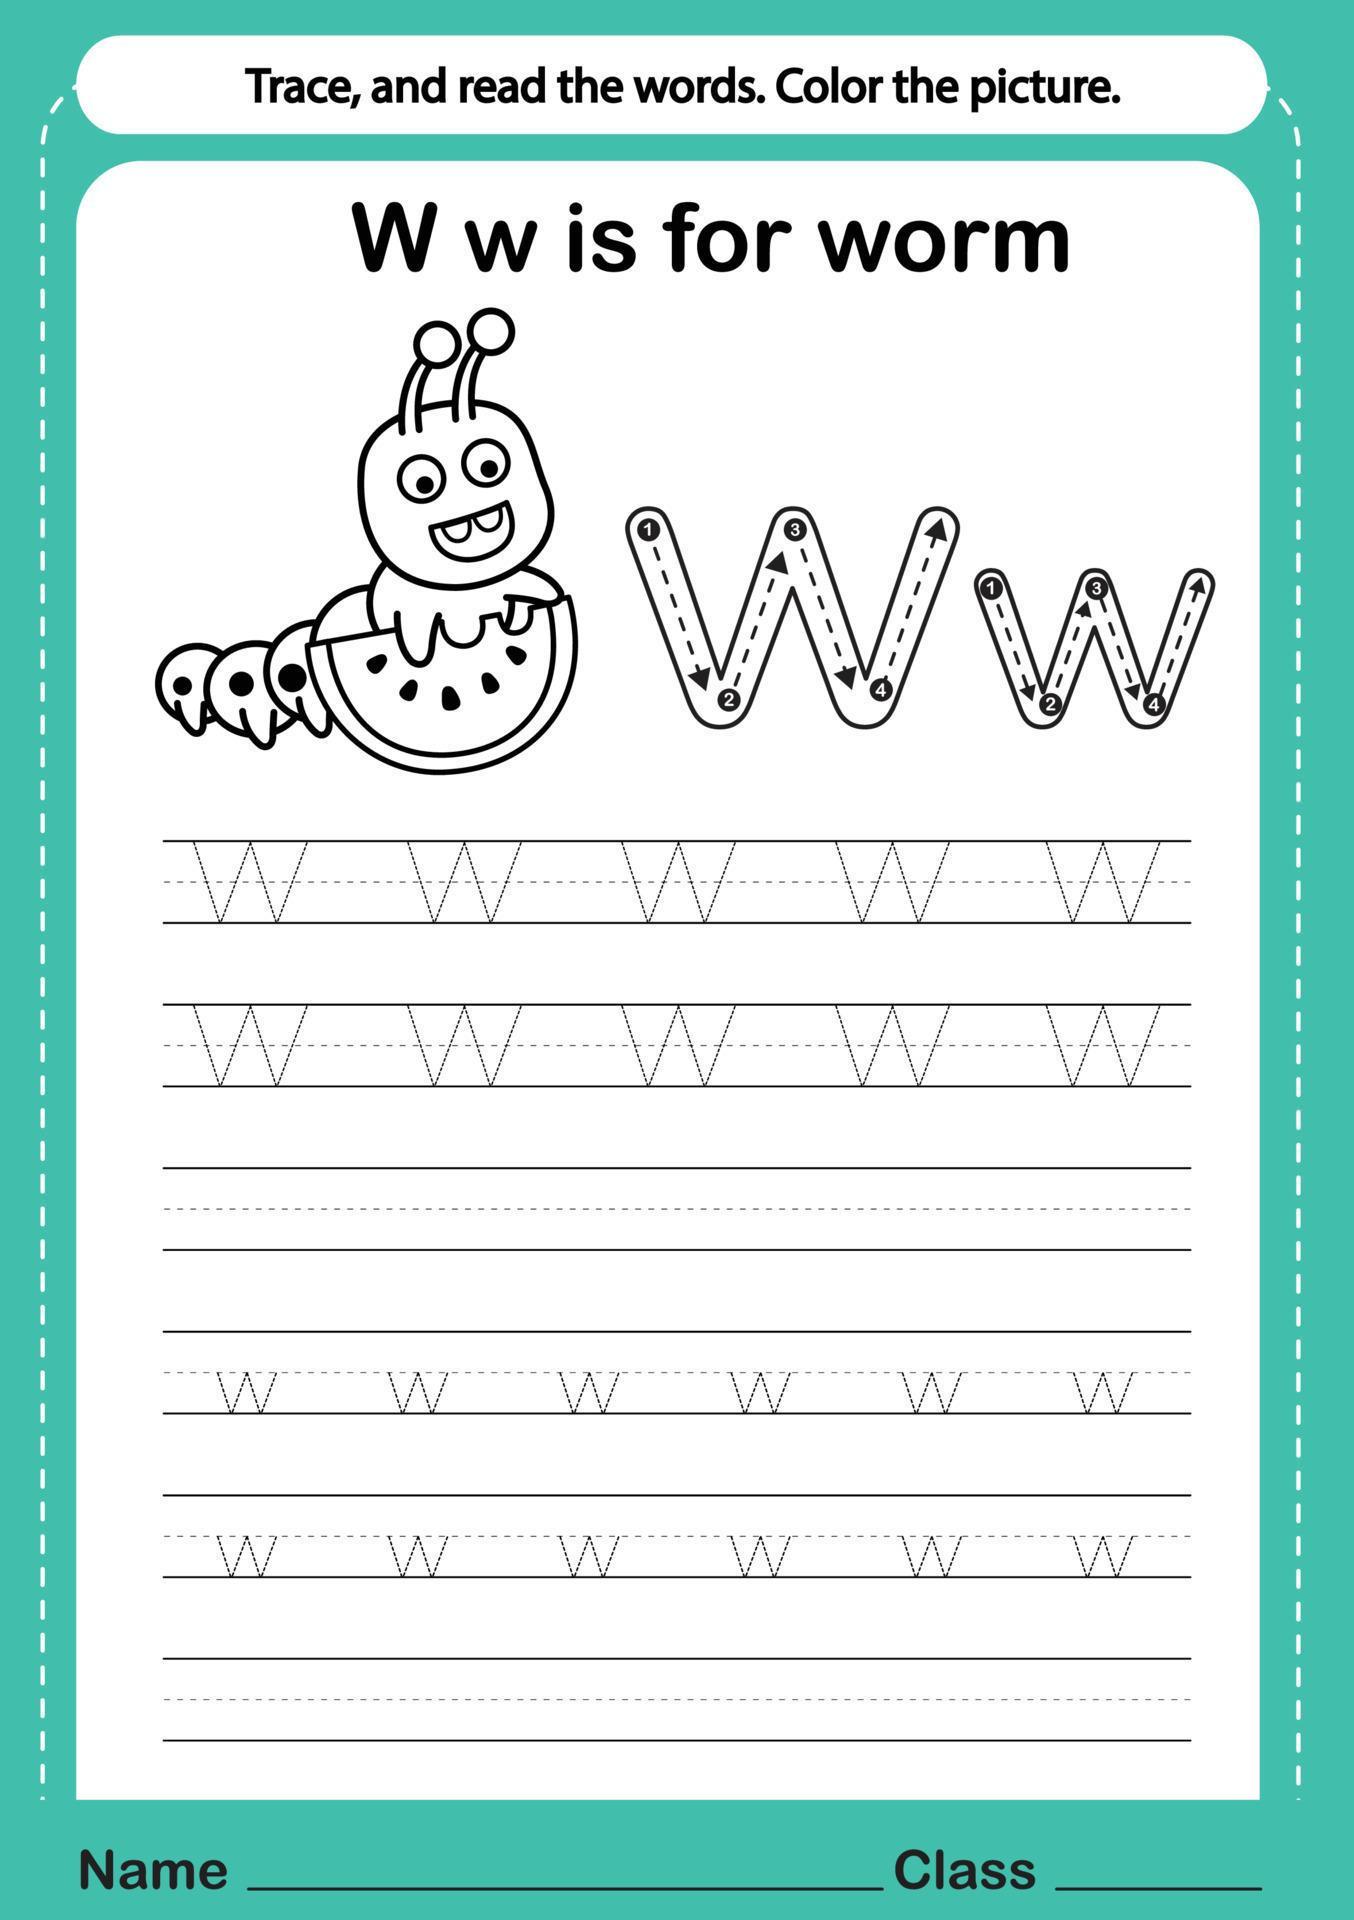 Alphabet w exercise with cartoon vocabulary for coloring book ...